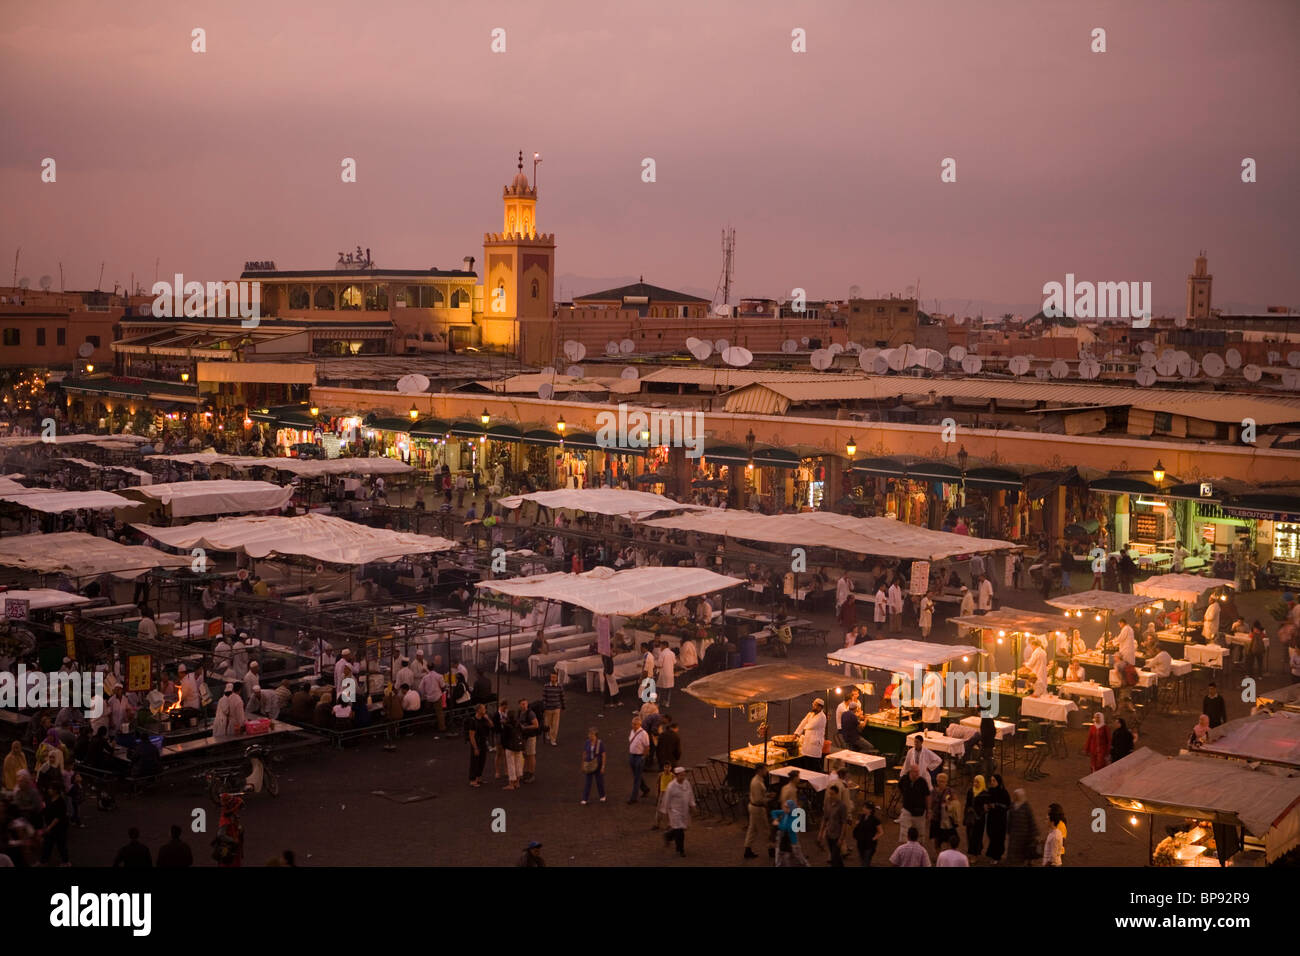 Djemaa el Fna square at sunset, View from Terrace of Cafe Glacier, Marrakesh, Morocco, Africa Stock Photo